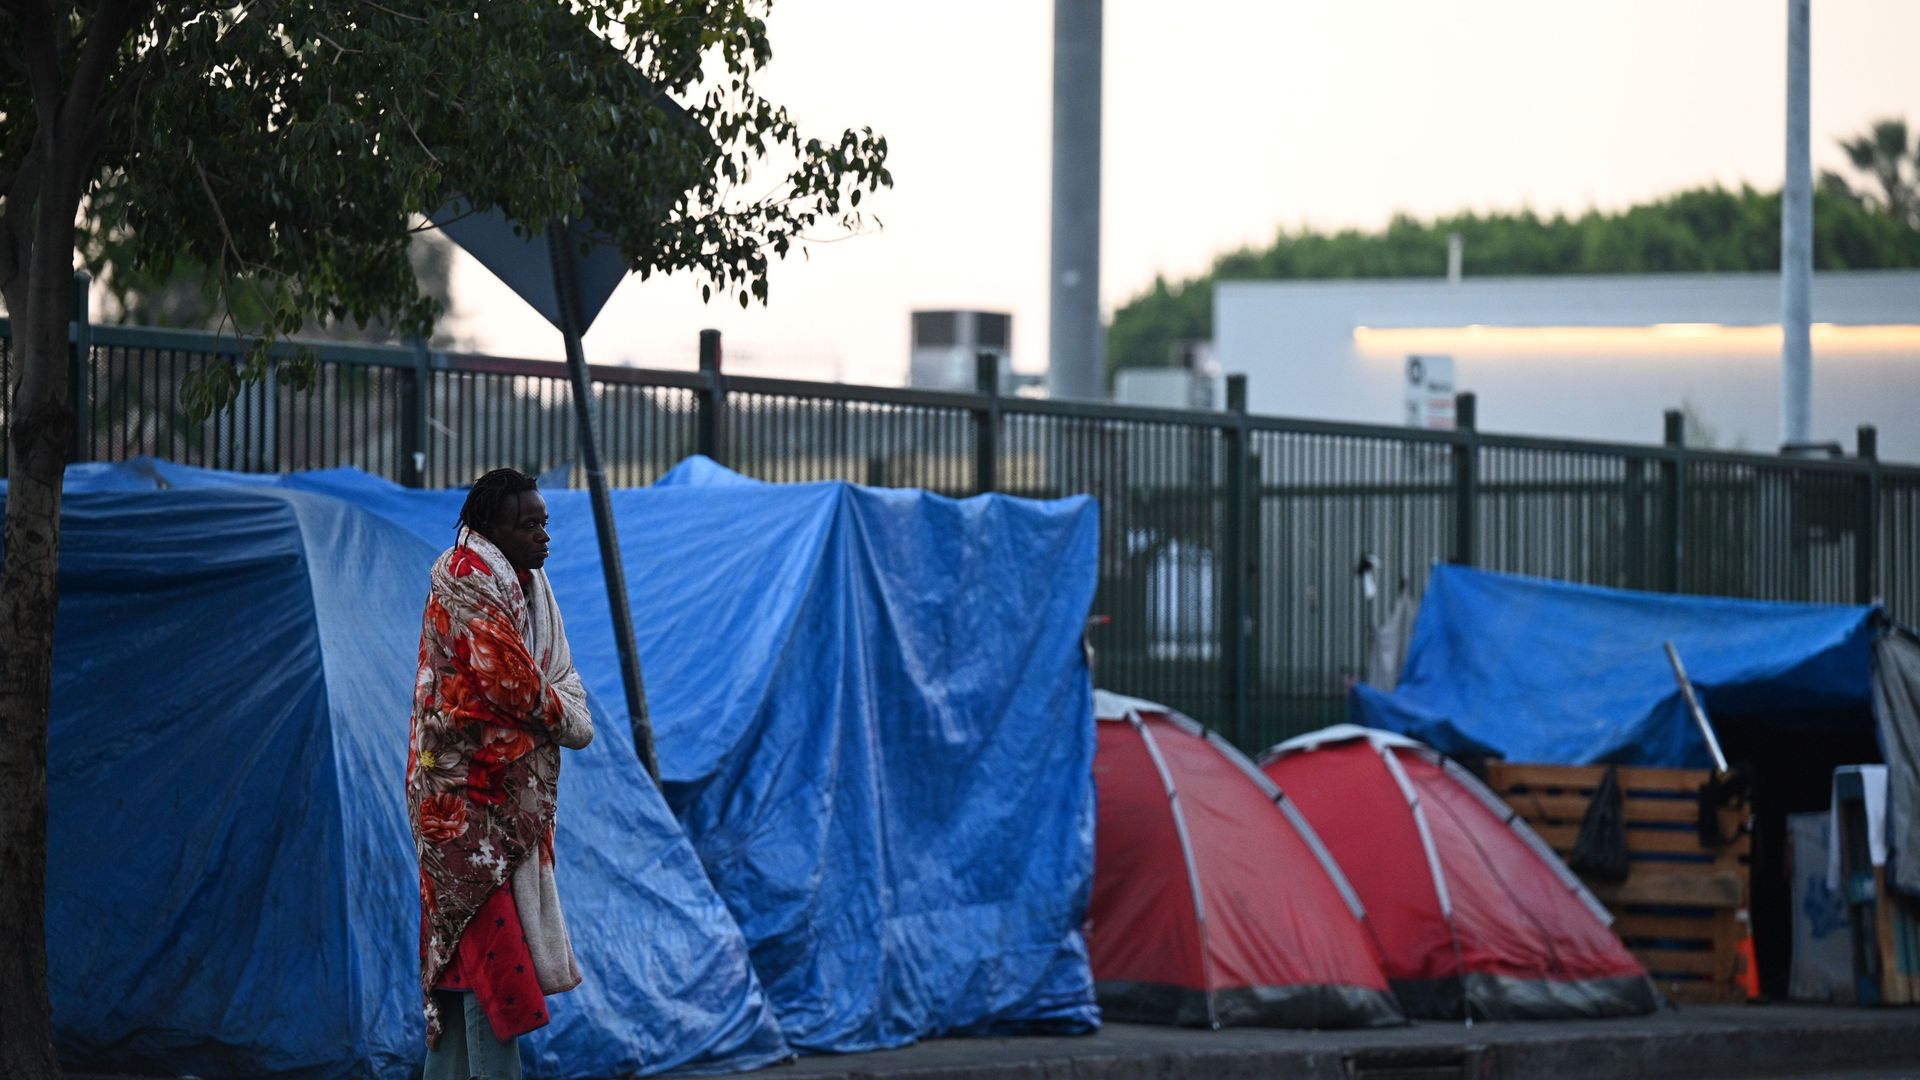 A man wrapped in a blanket stands outside blue tarp tents 